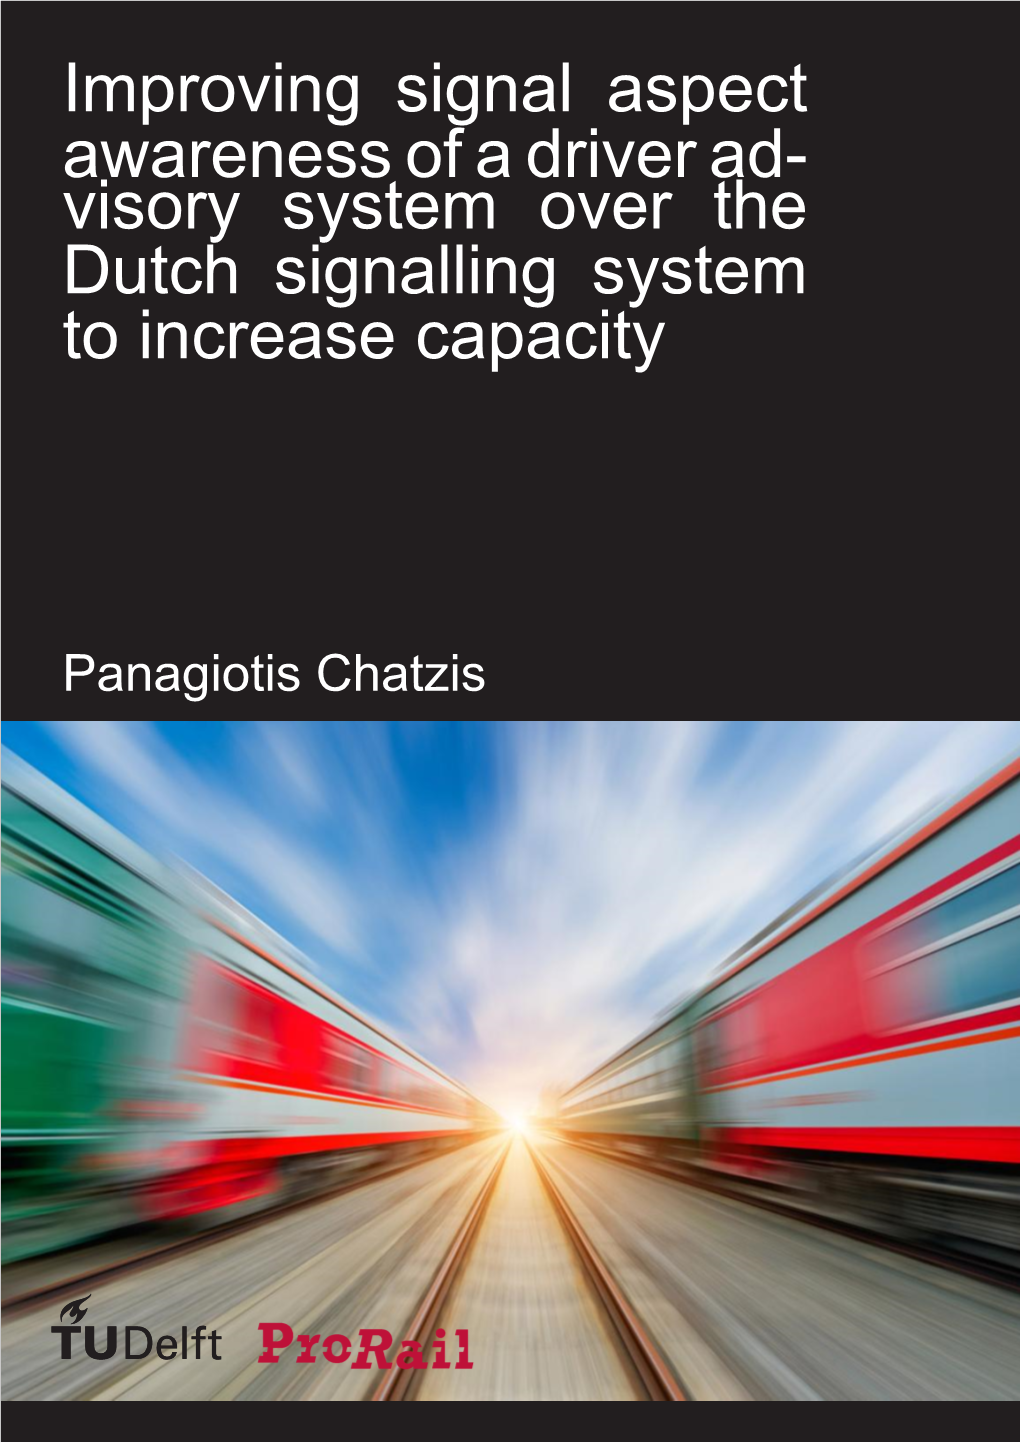 Improving Signal Aspect Awareness of a Driver Advisory System Over the Dutch Signalling System to Increase Capacity